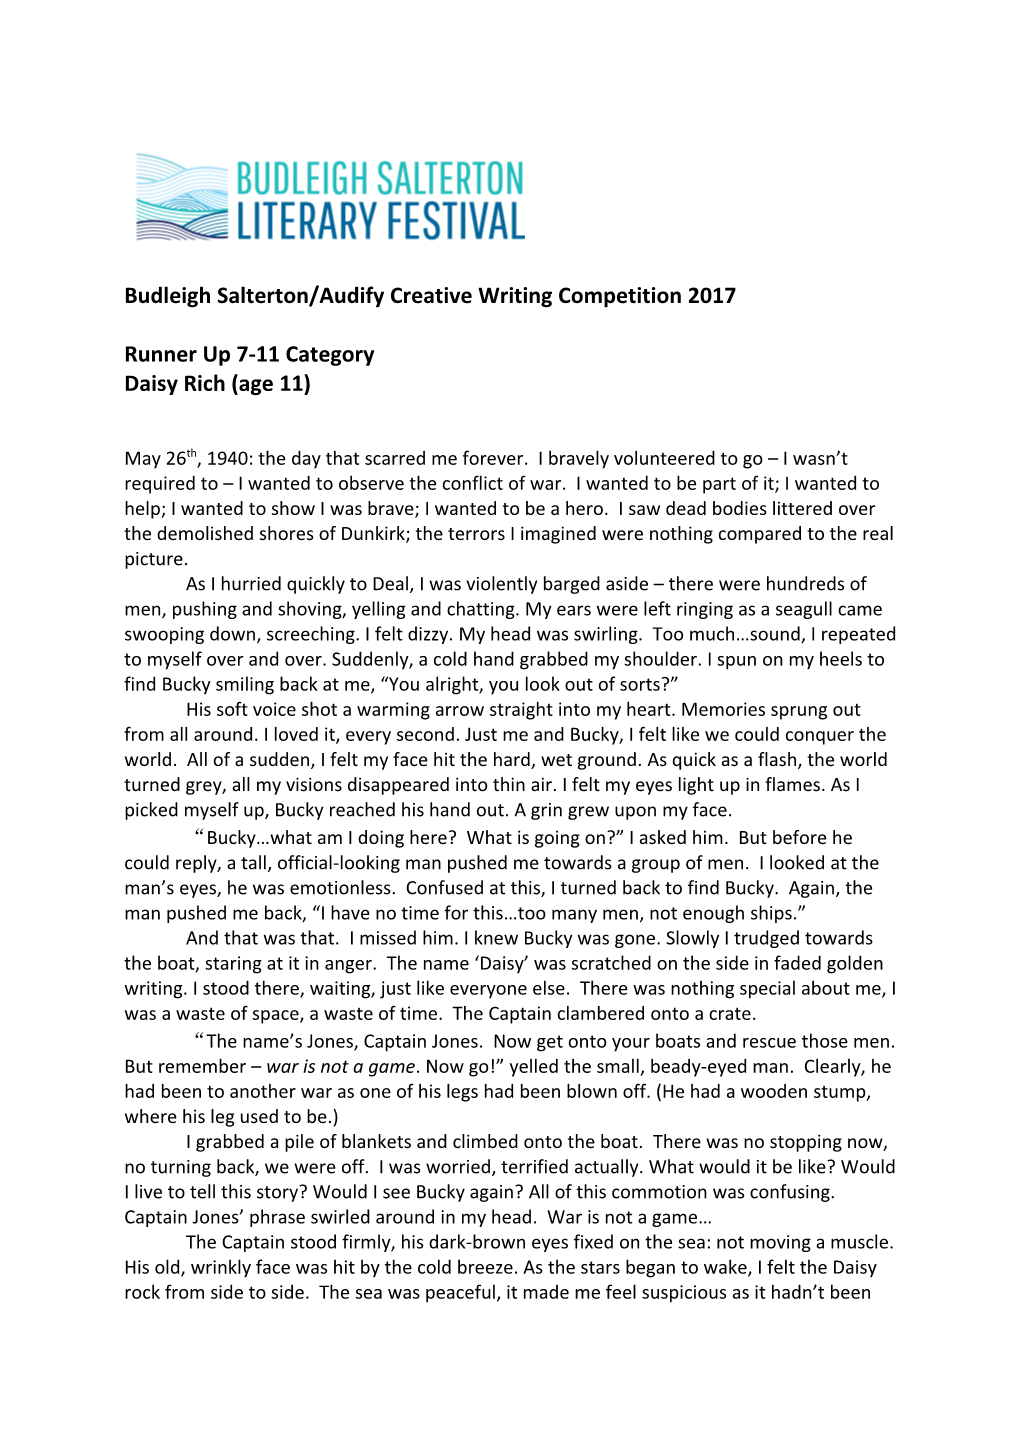 Budleigh Salterton/Audify Creative Writing Competition 2017 s1